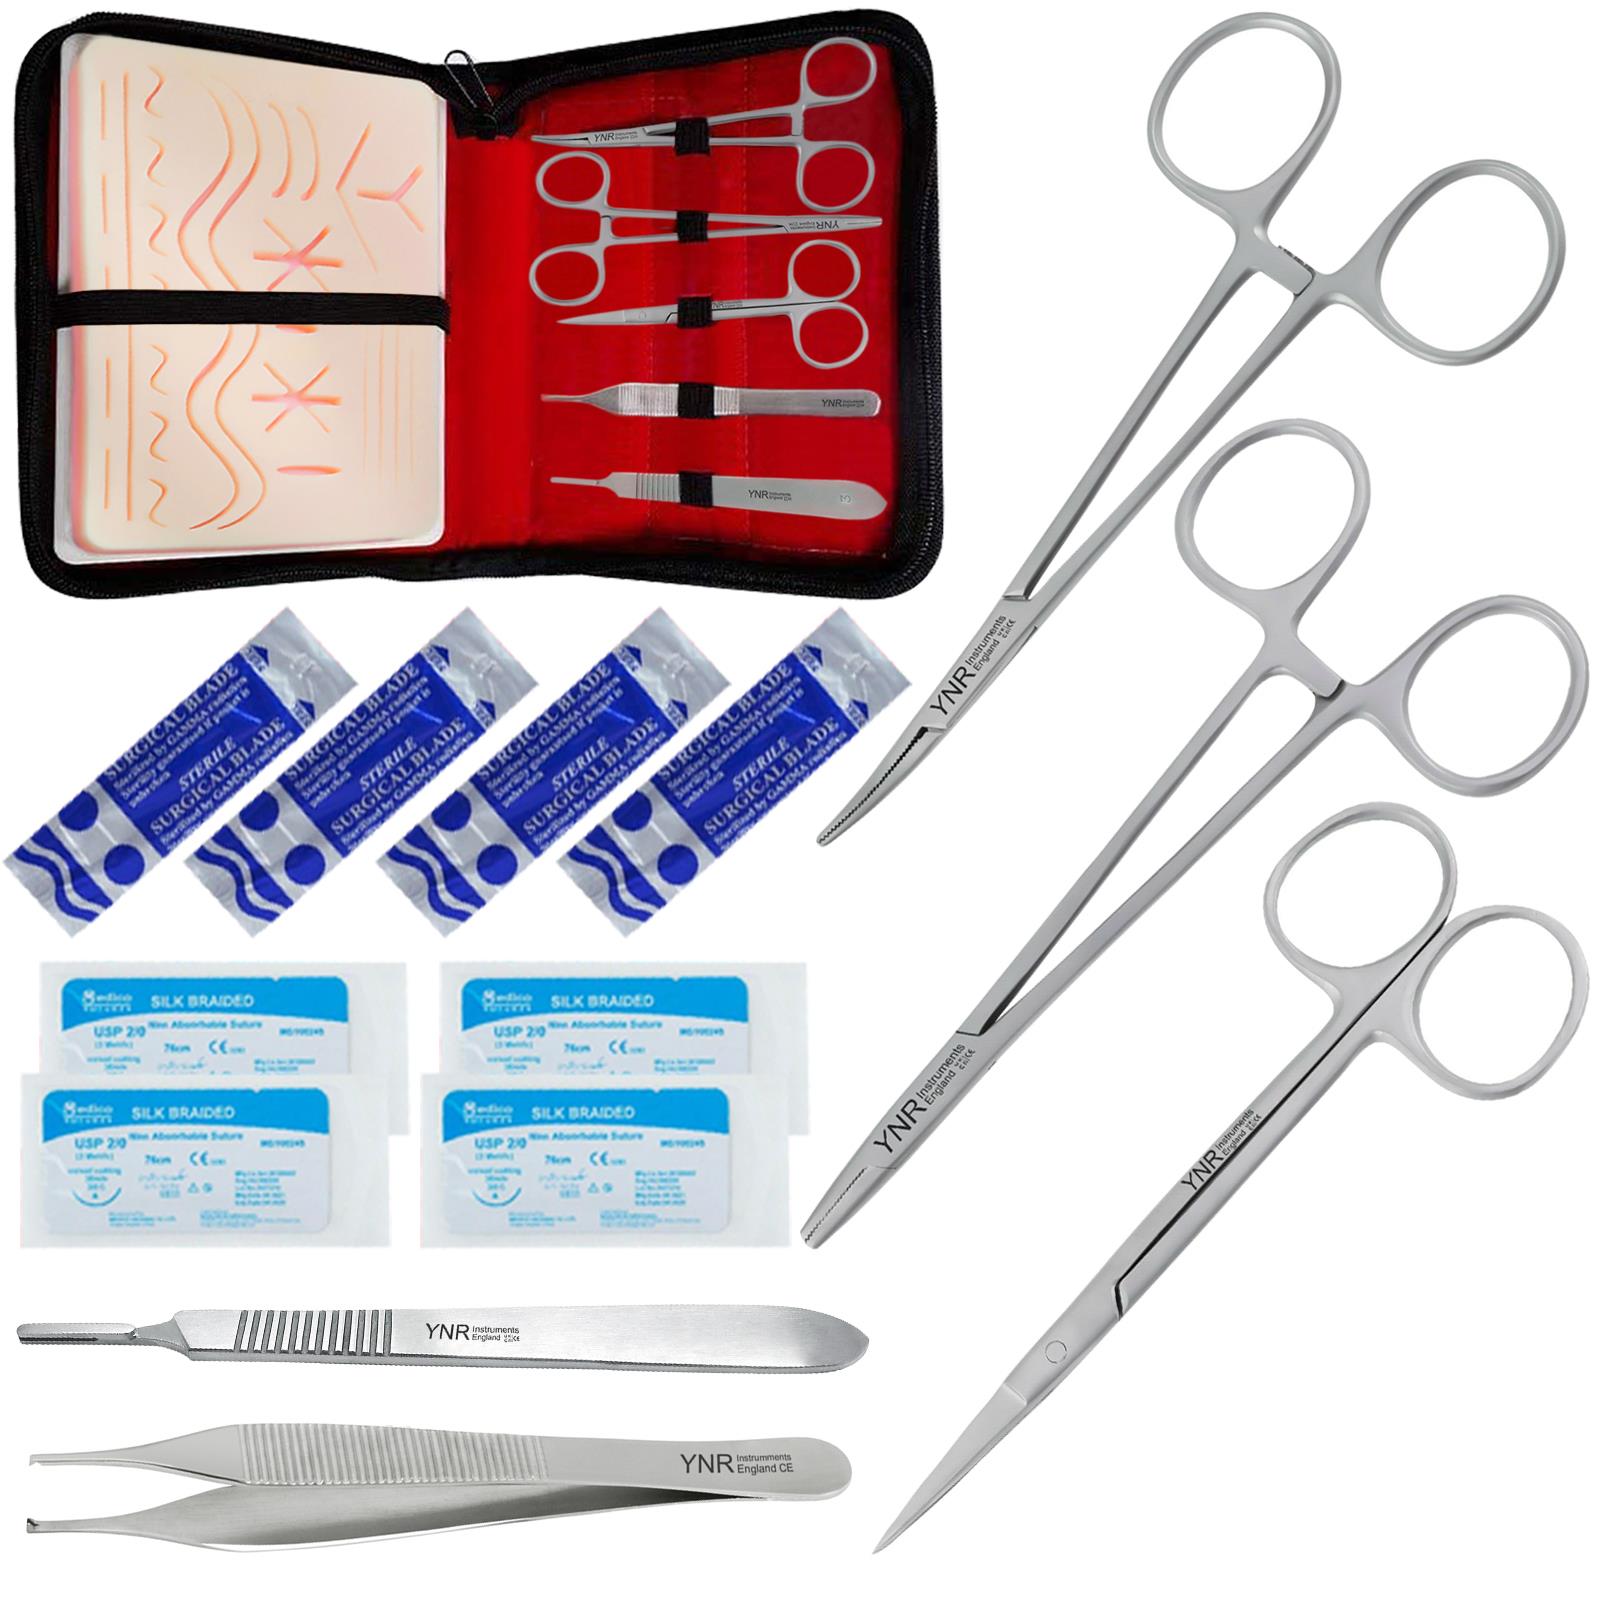 15 Pcs Practice Suture Training Kit for Medical Veterinary, Surgical Mart